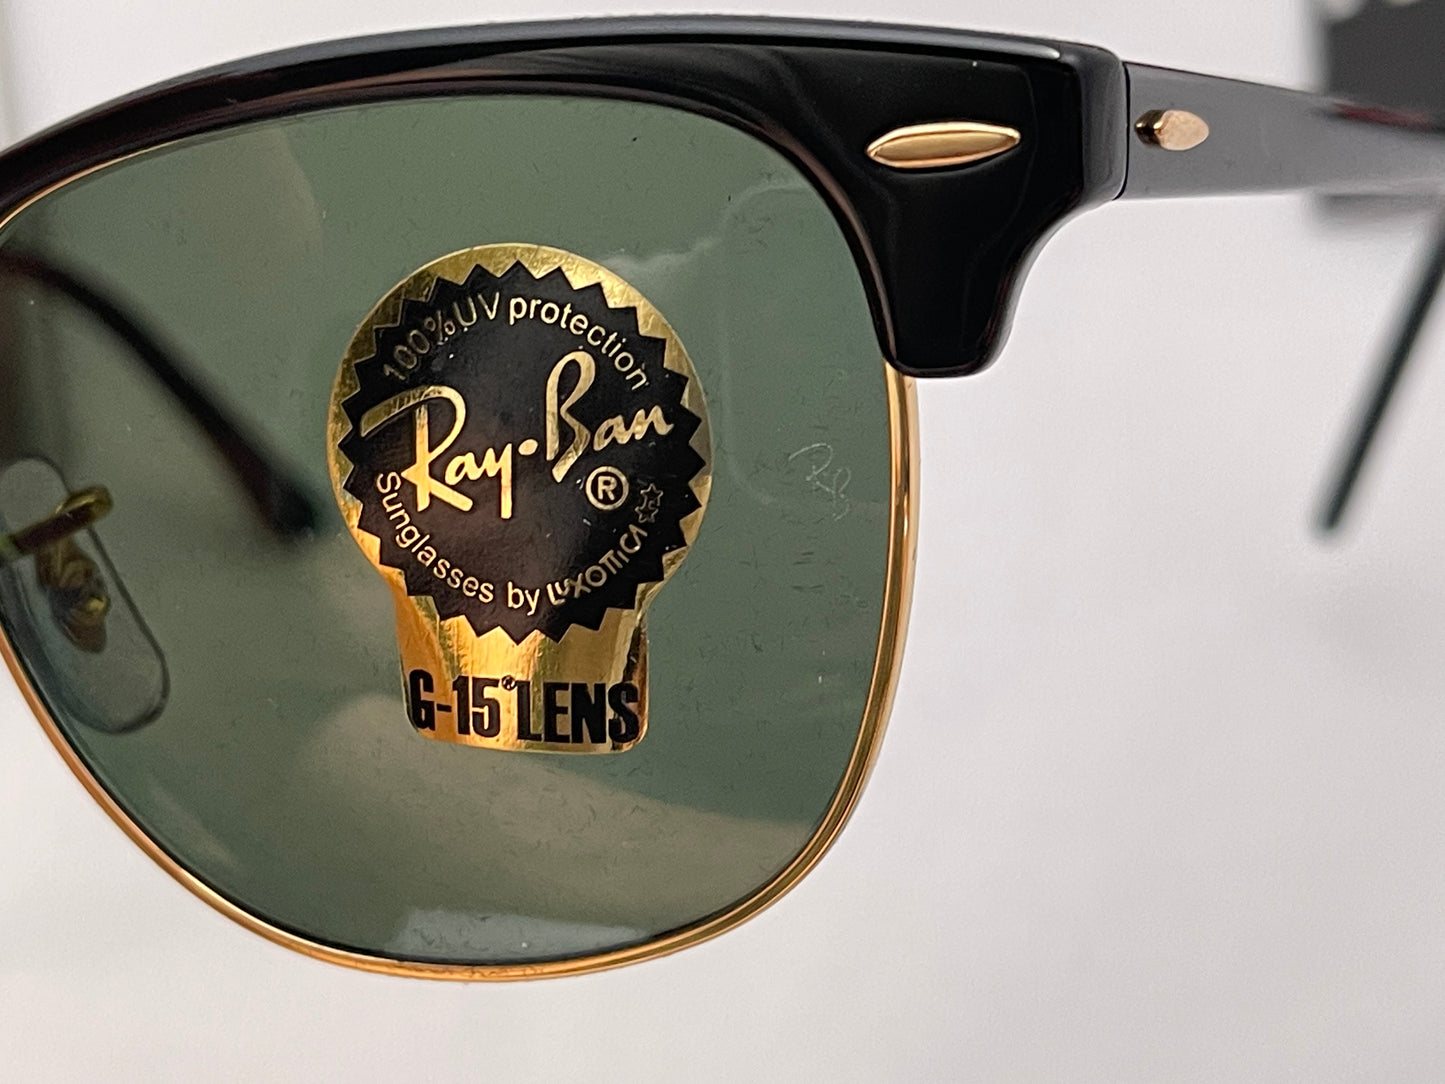 Ray-Ban Clubmaster Black Gold 51mm New